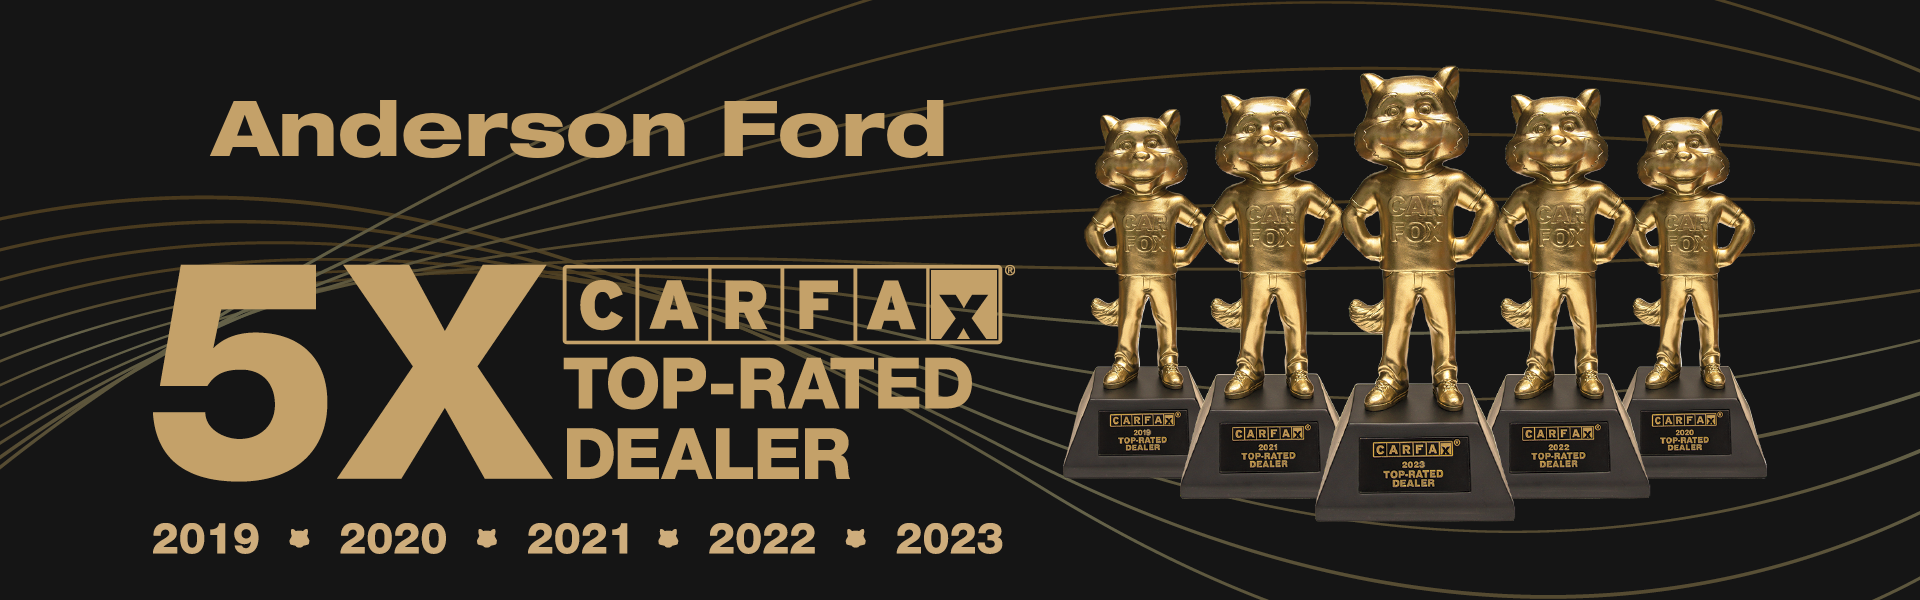 Carfax Top Rated Dealer for 5 years